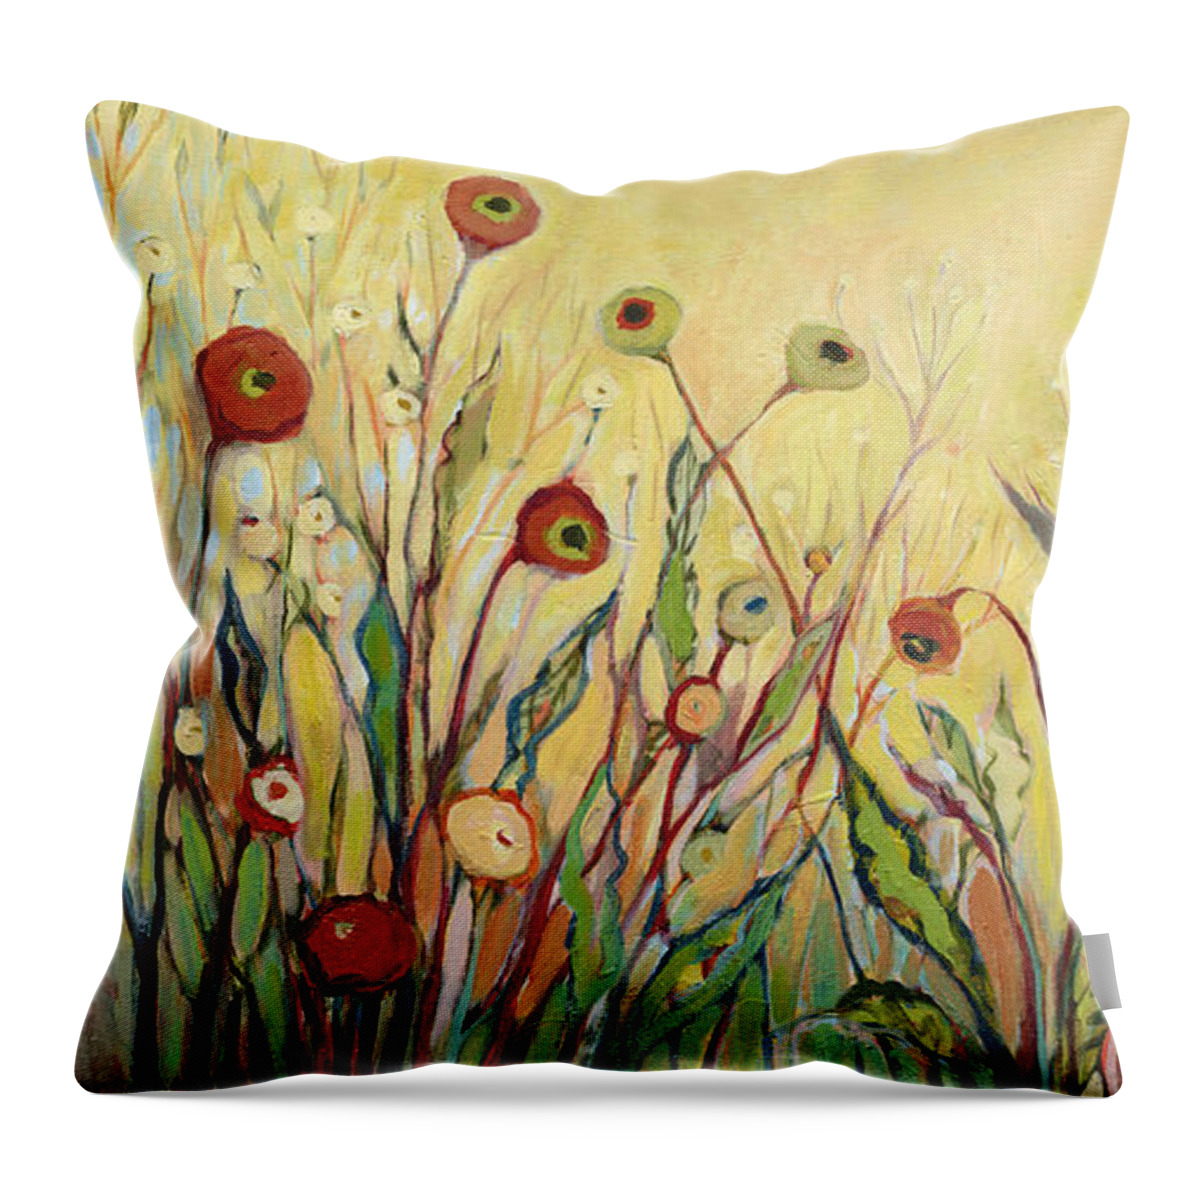 Poppy Throw Pillow featuring the painting Summer Poppies by Jennifer Lommers